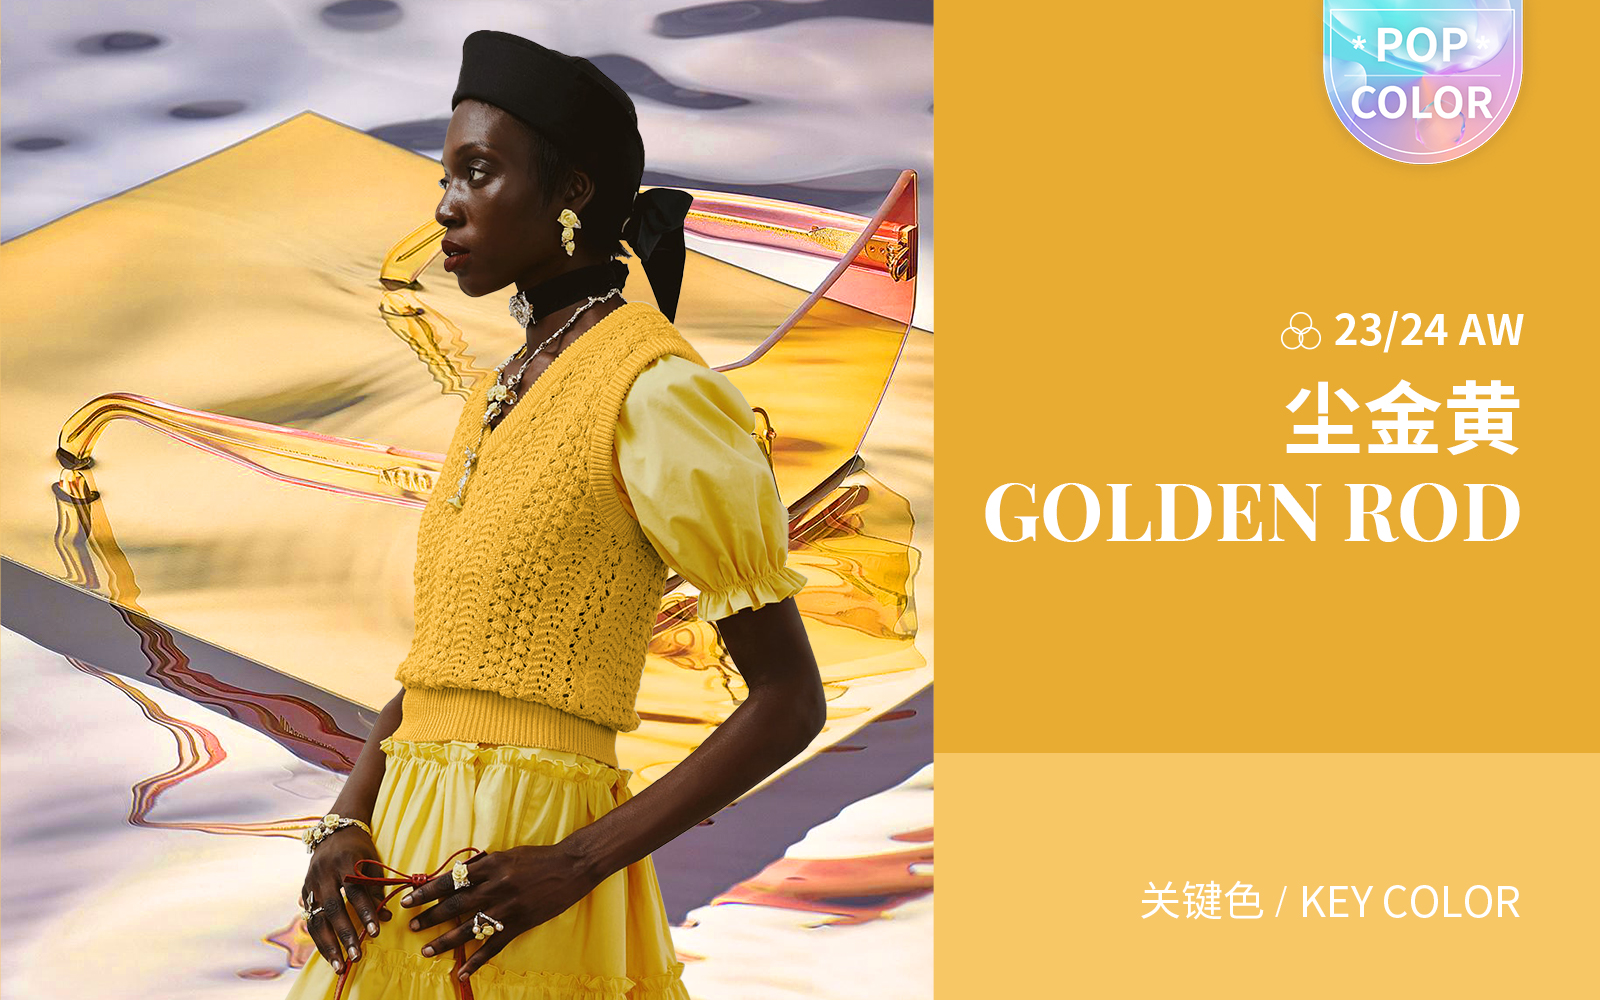 Golden Rod -- The Color Trend for Young Women's Knitwear